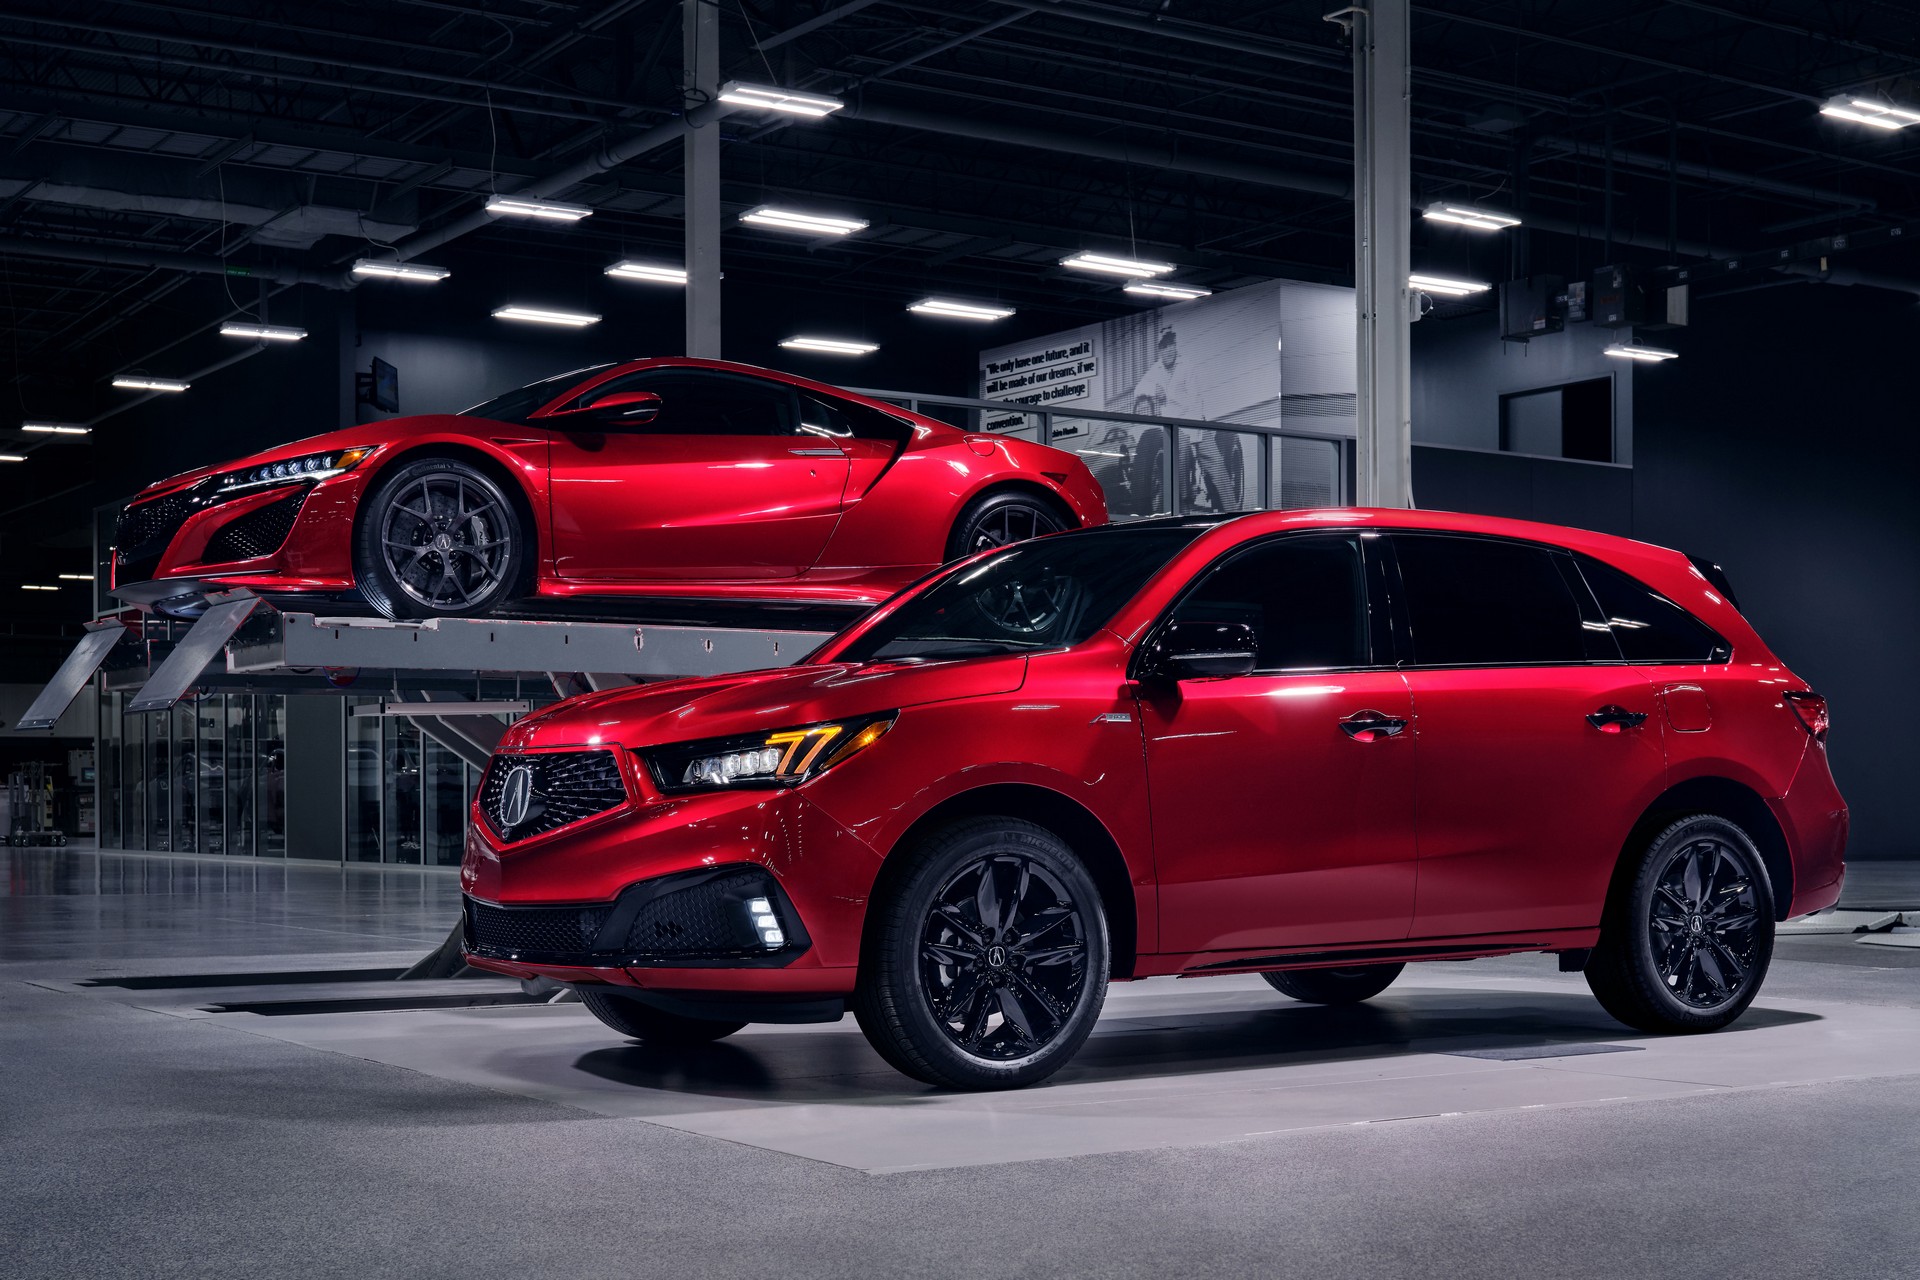 2020 Acura Mdx Pmc Edition Is Handcrafted By The Same